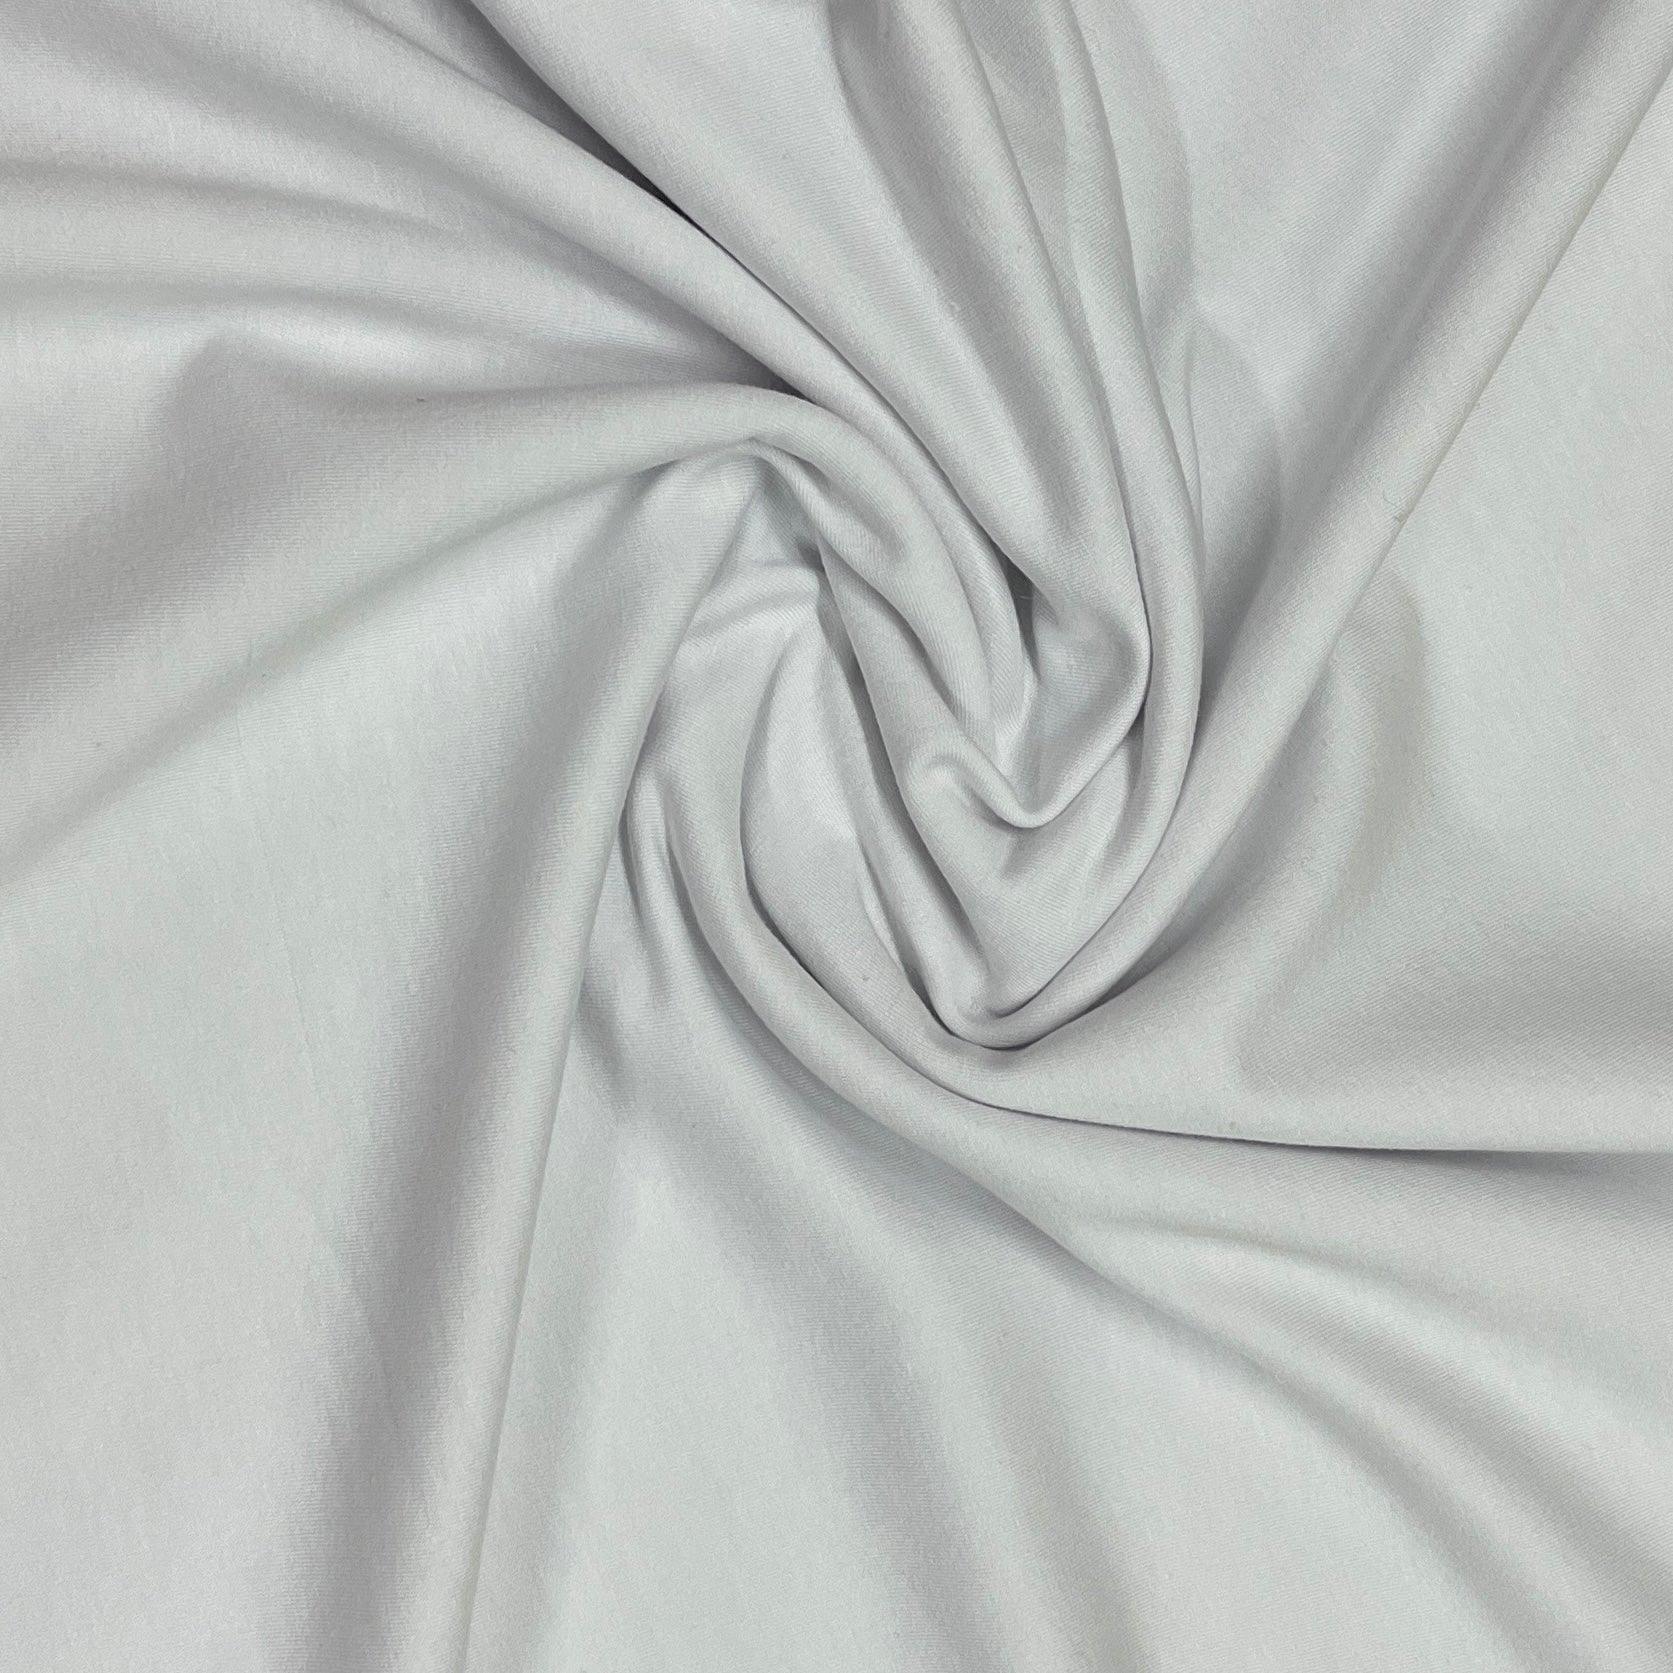 White Bamboo Stretch Fleece Fabric - 290 GSM, Knit in the USA, $14.60/yd, 15 Yards - Nature's Fabrics